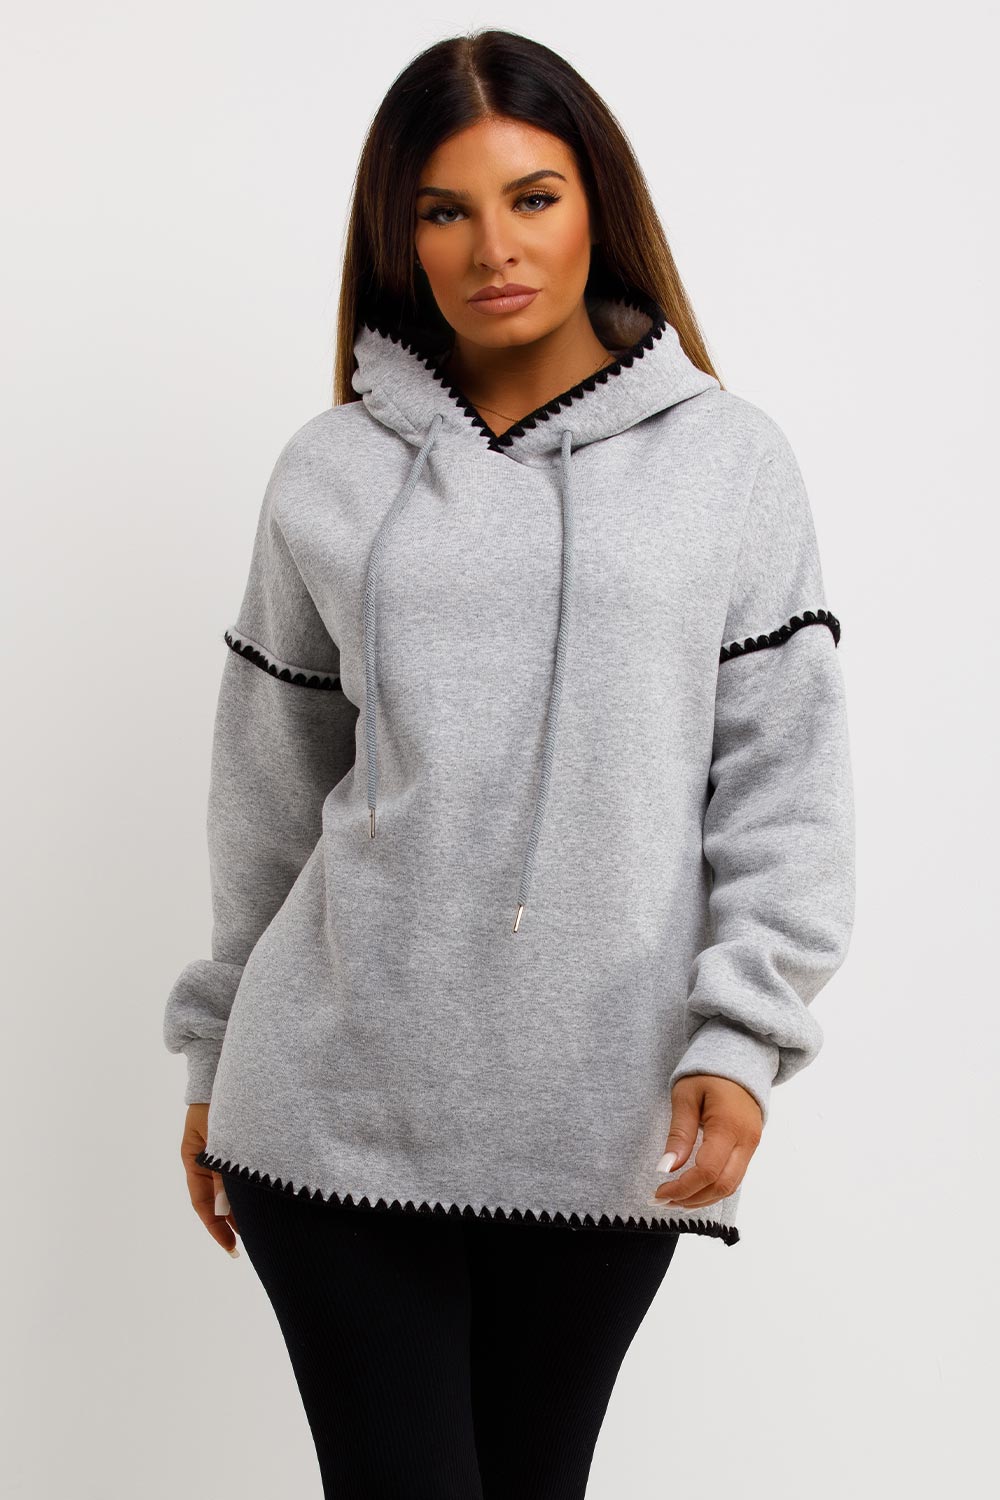 grey oversized hoodie with contrast stitches womens